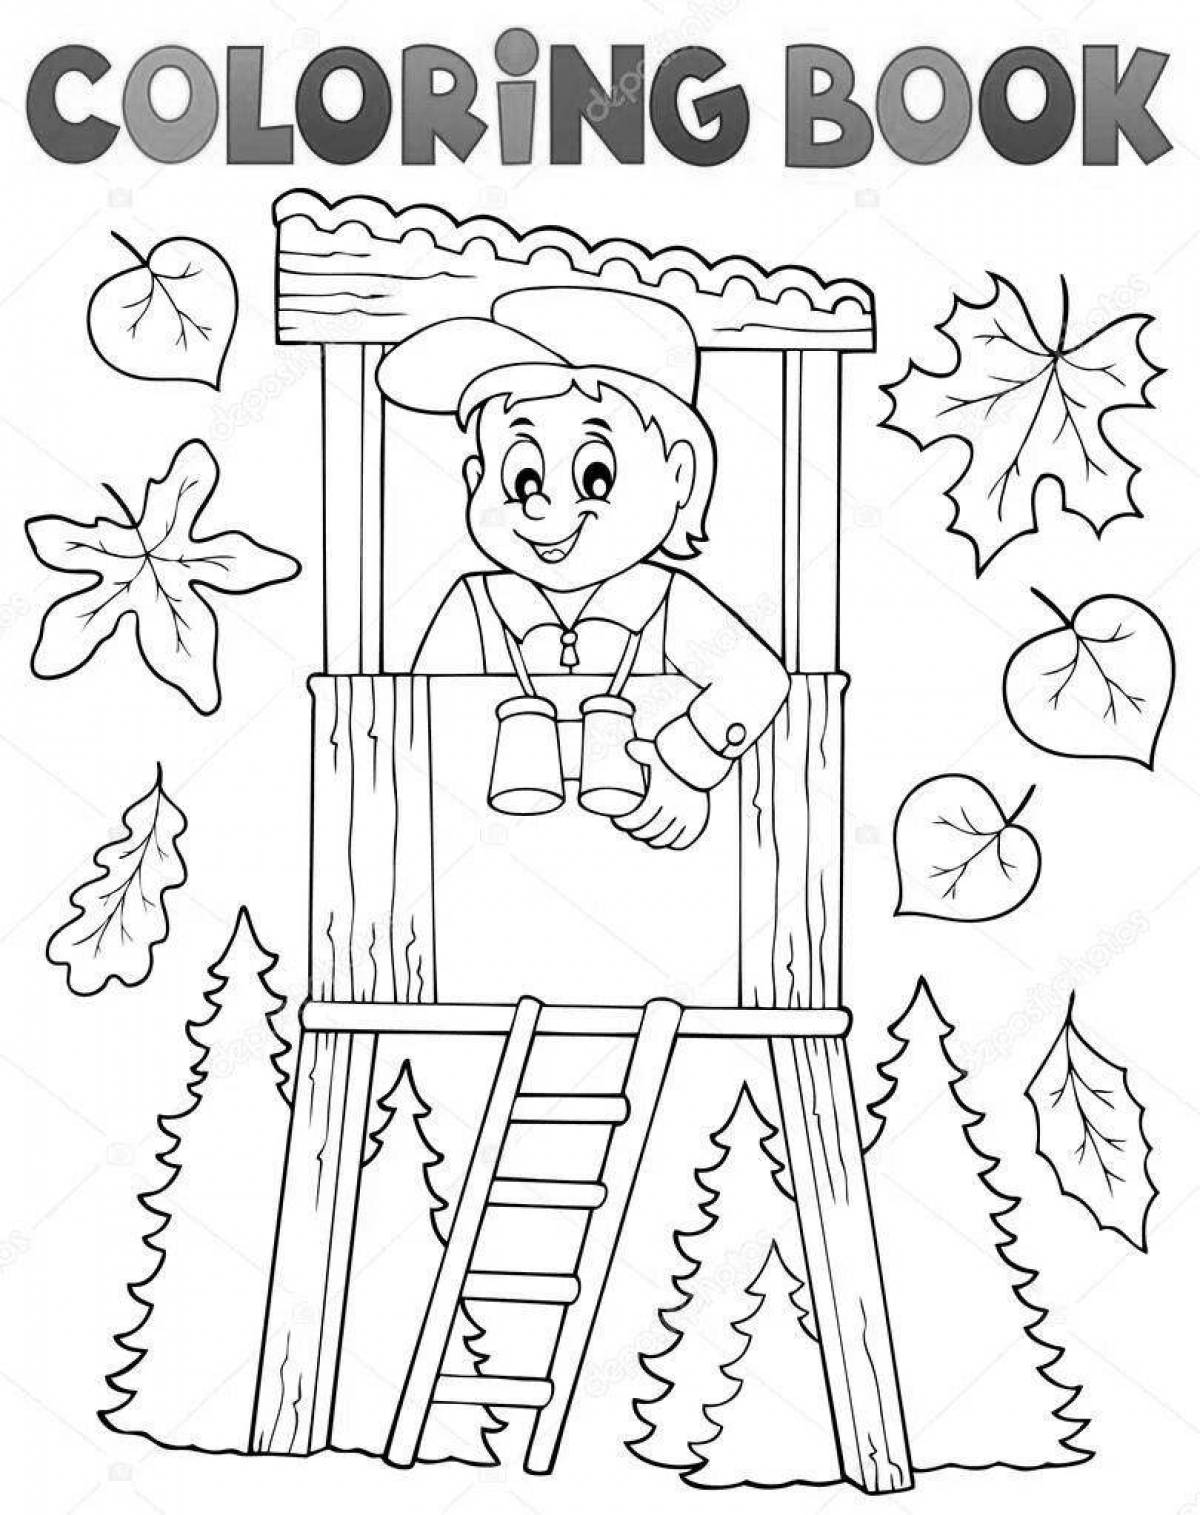 Vibrant forester coloring page